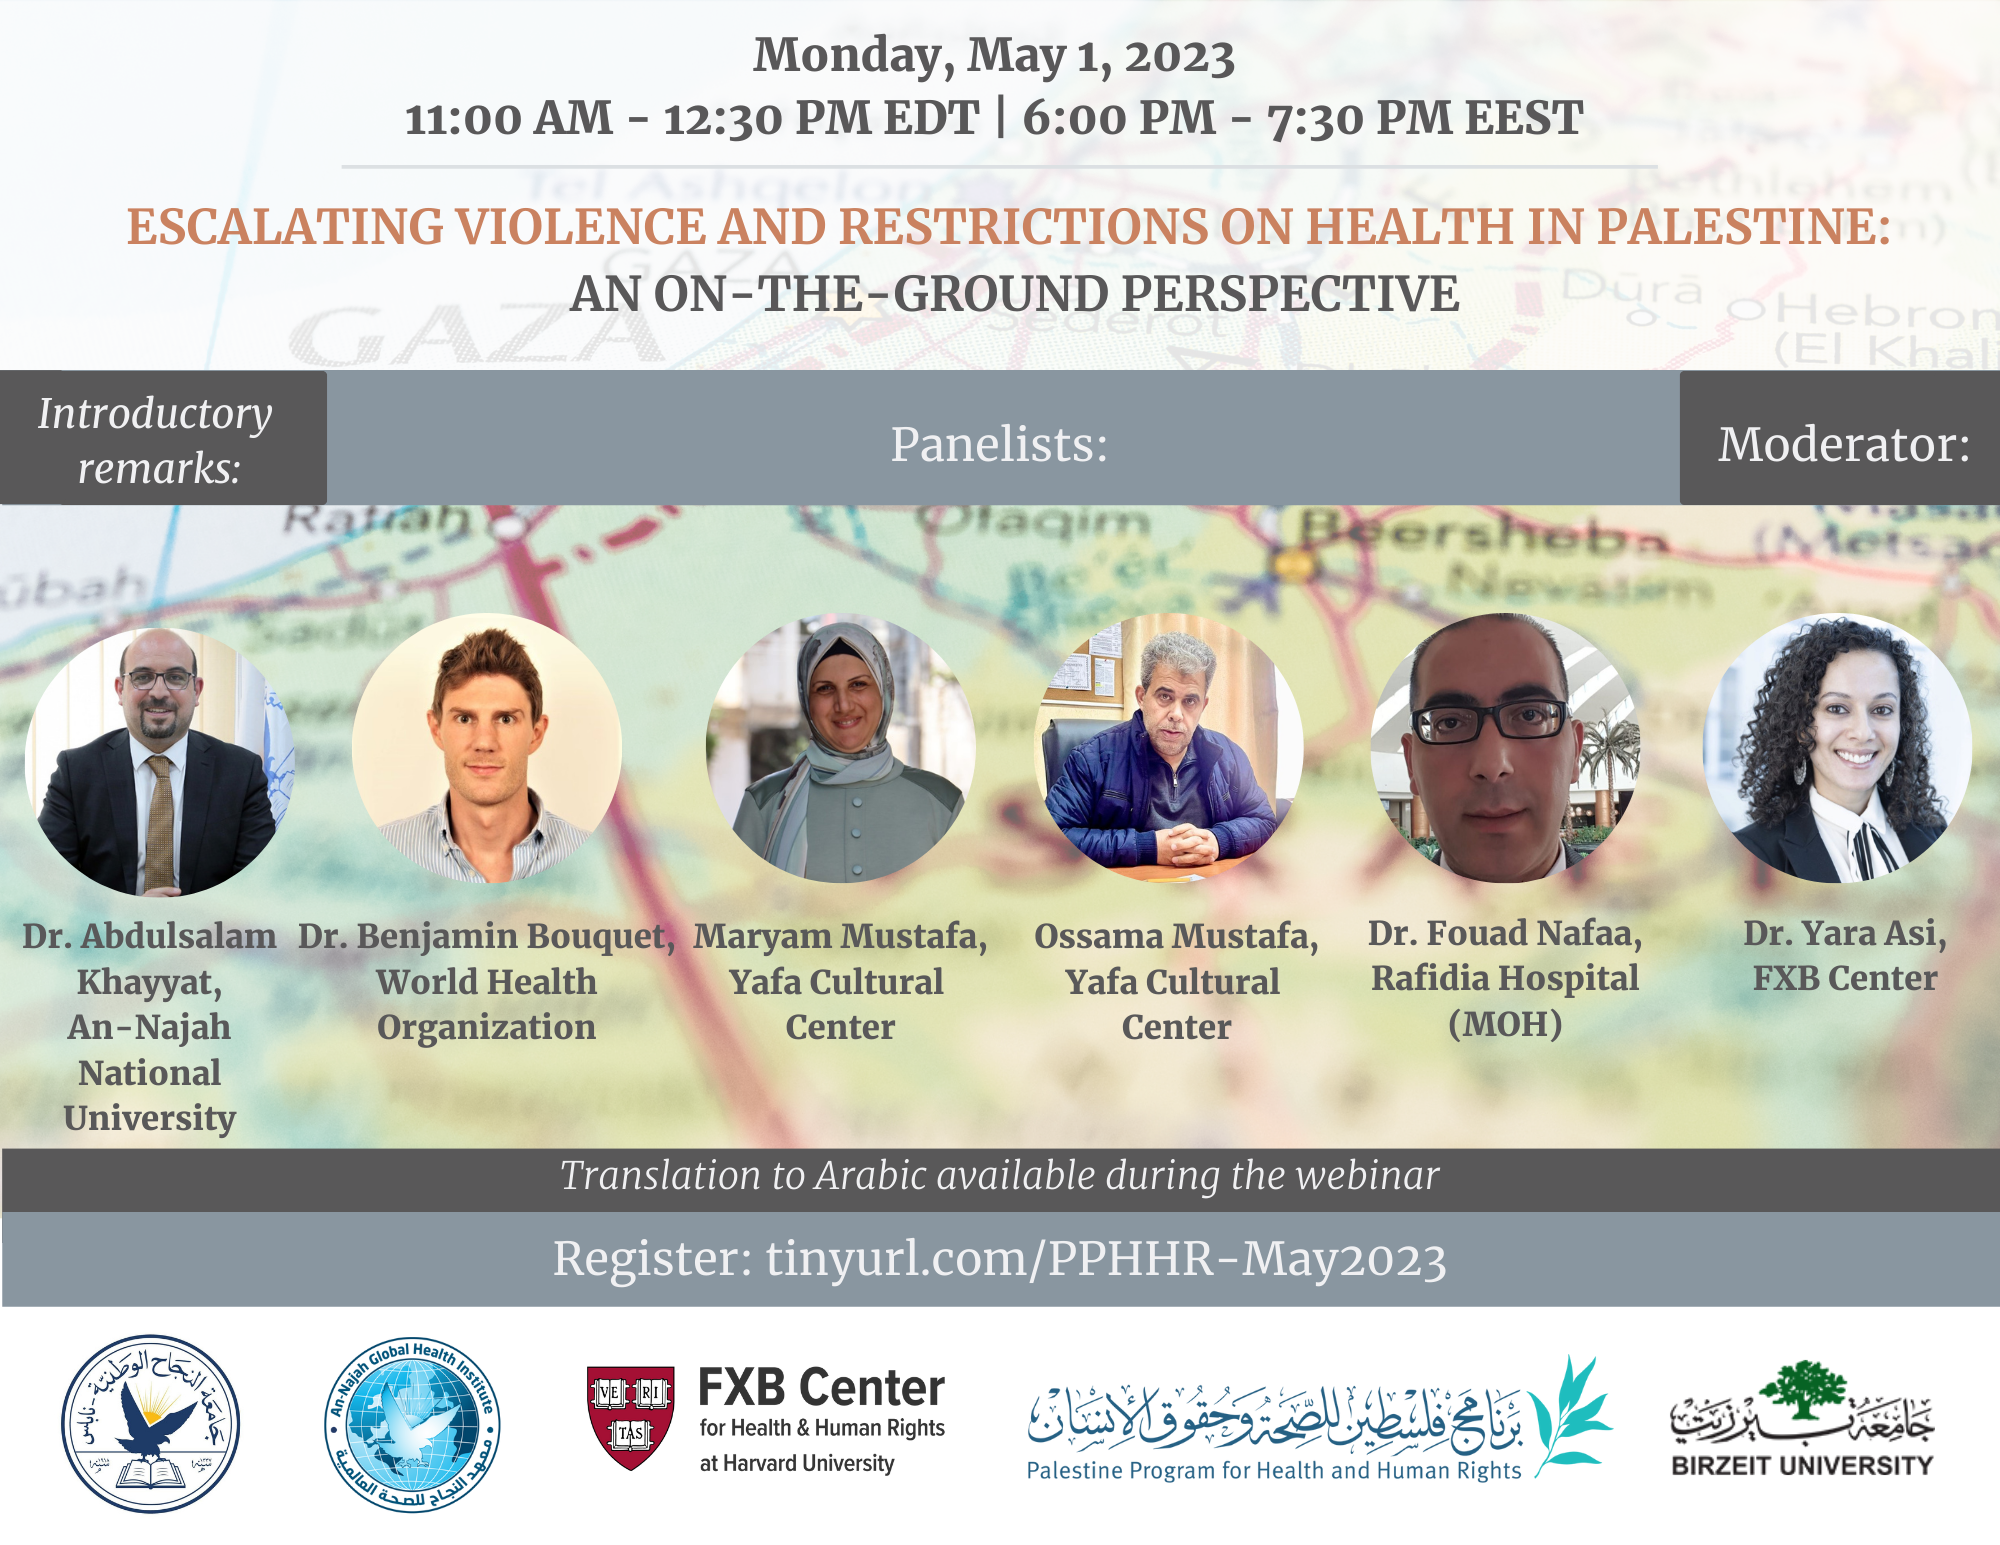 Escalating Violence and Restrictions on Health in Palestine: An On-the-ground Perspective Flier